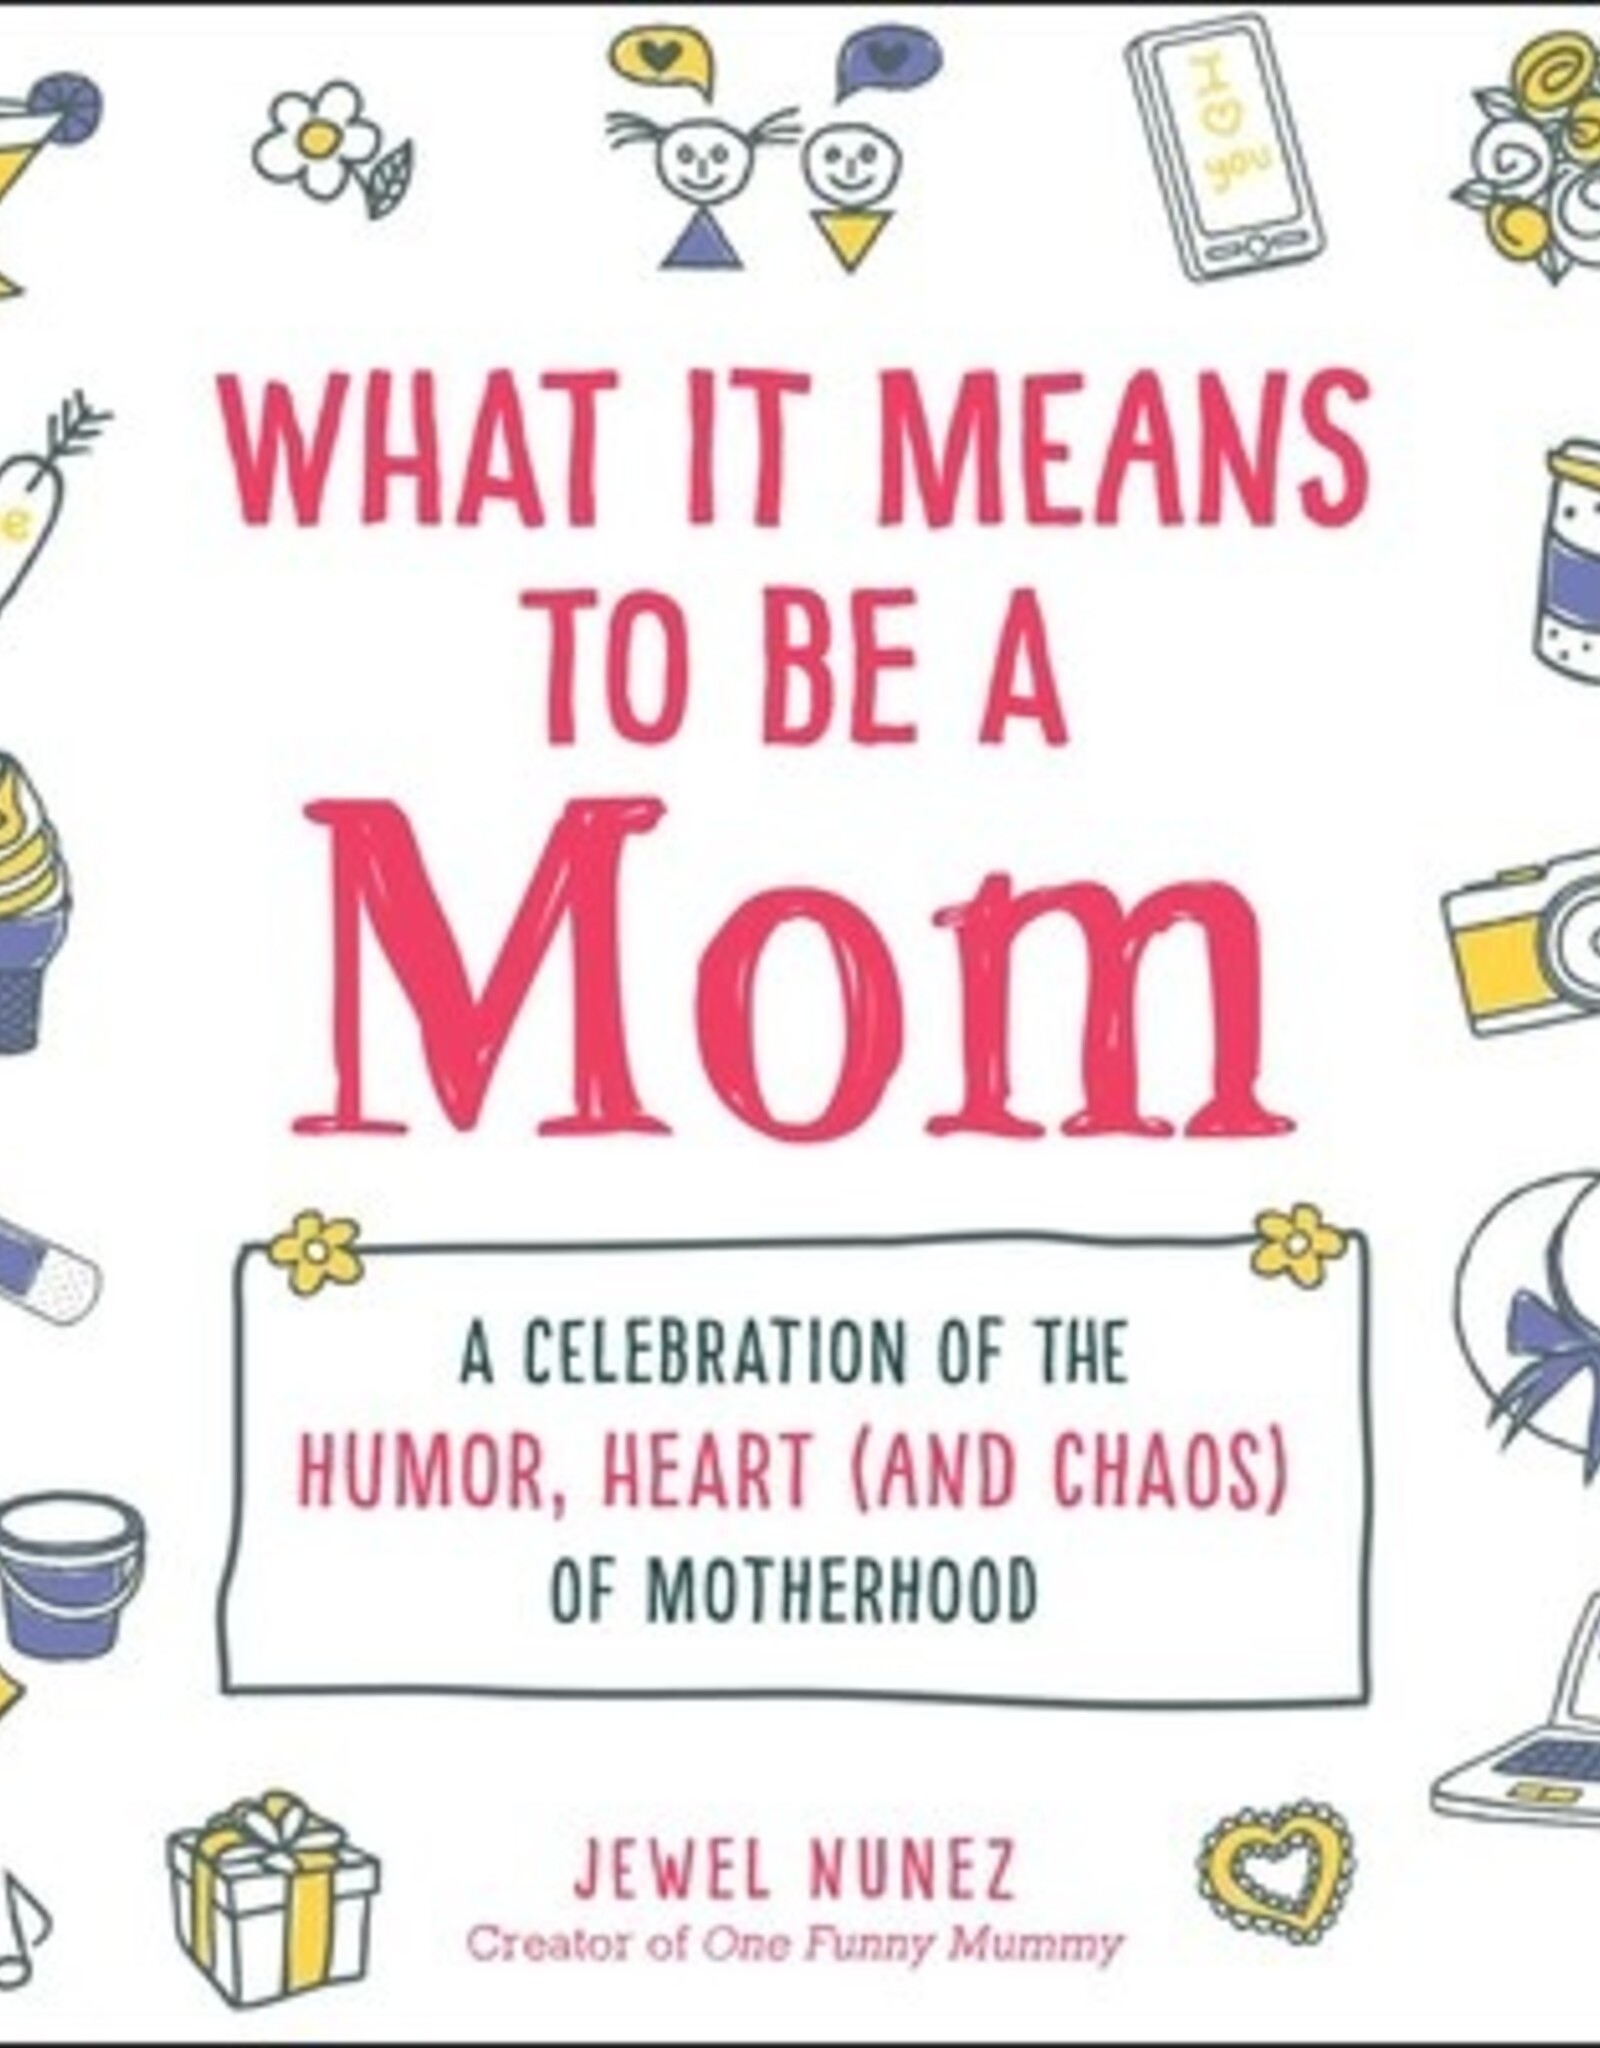 Simon & Schuster What It Means To Be Mom